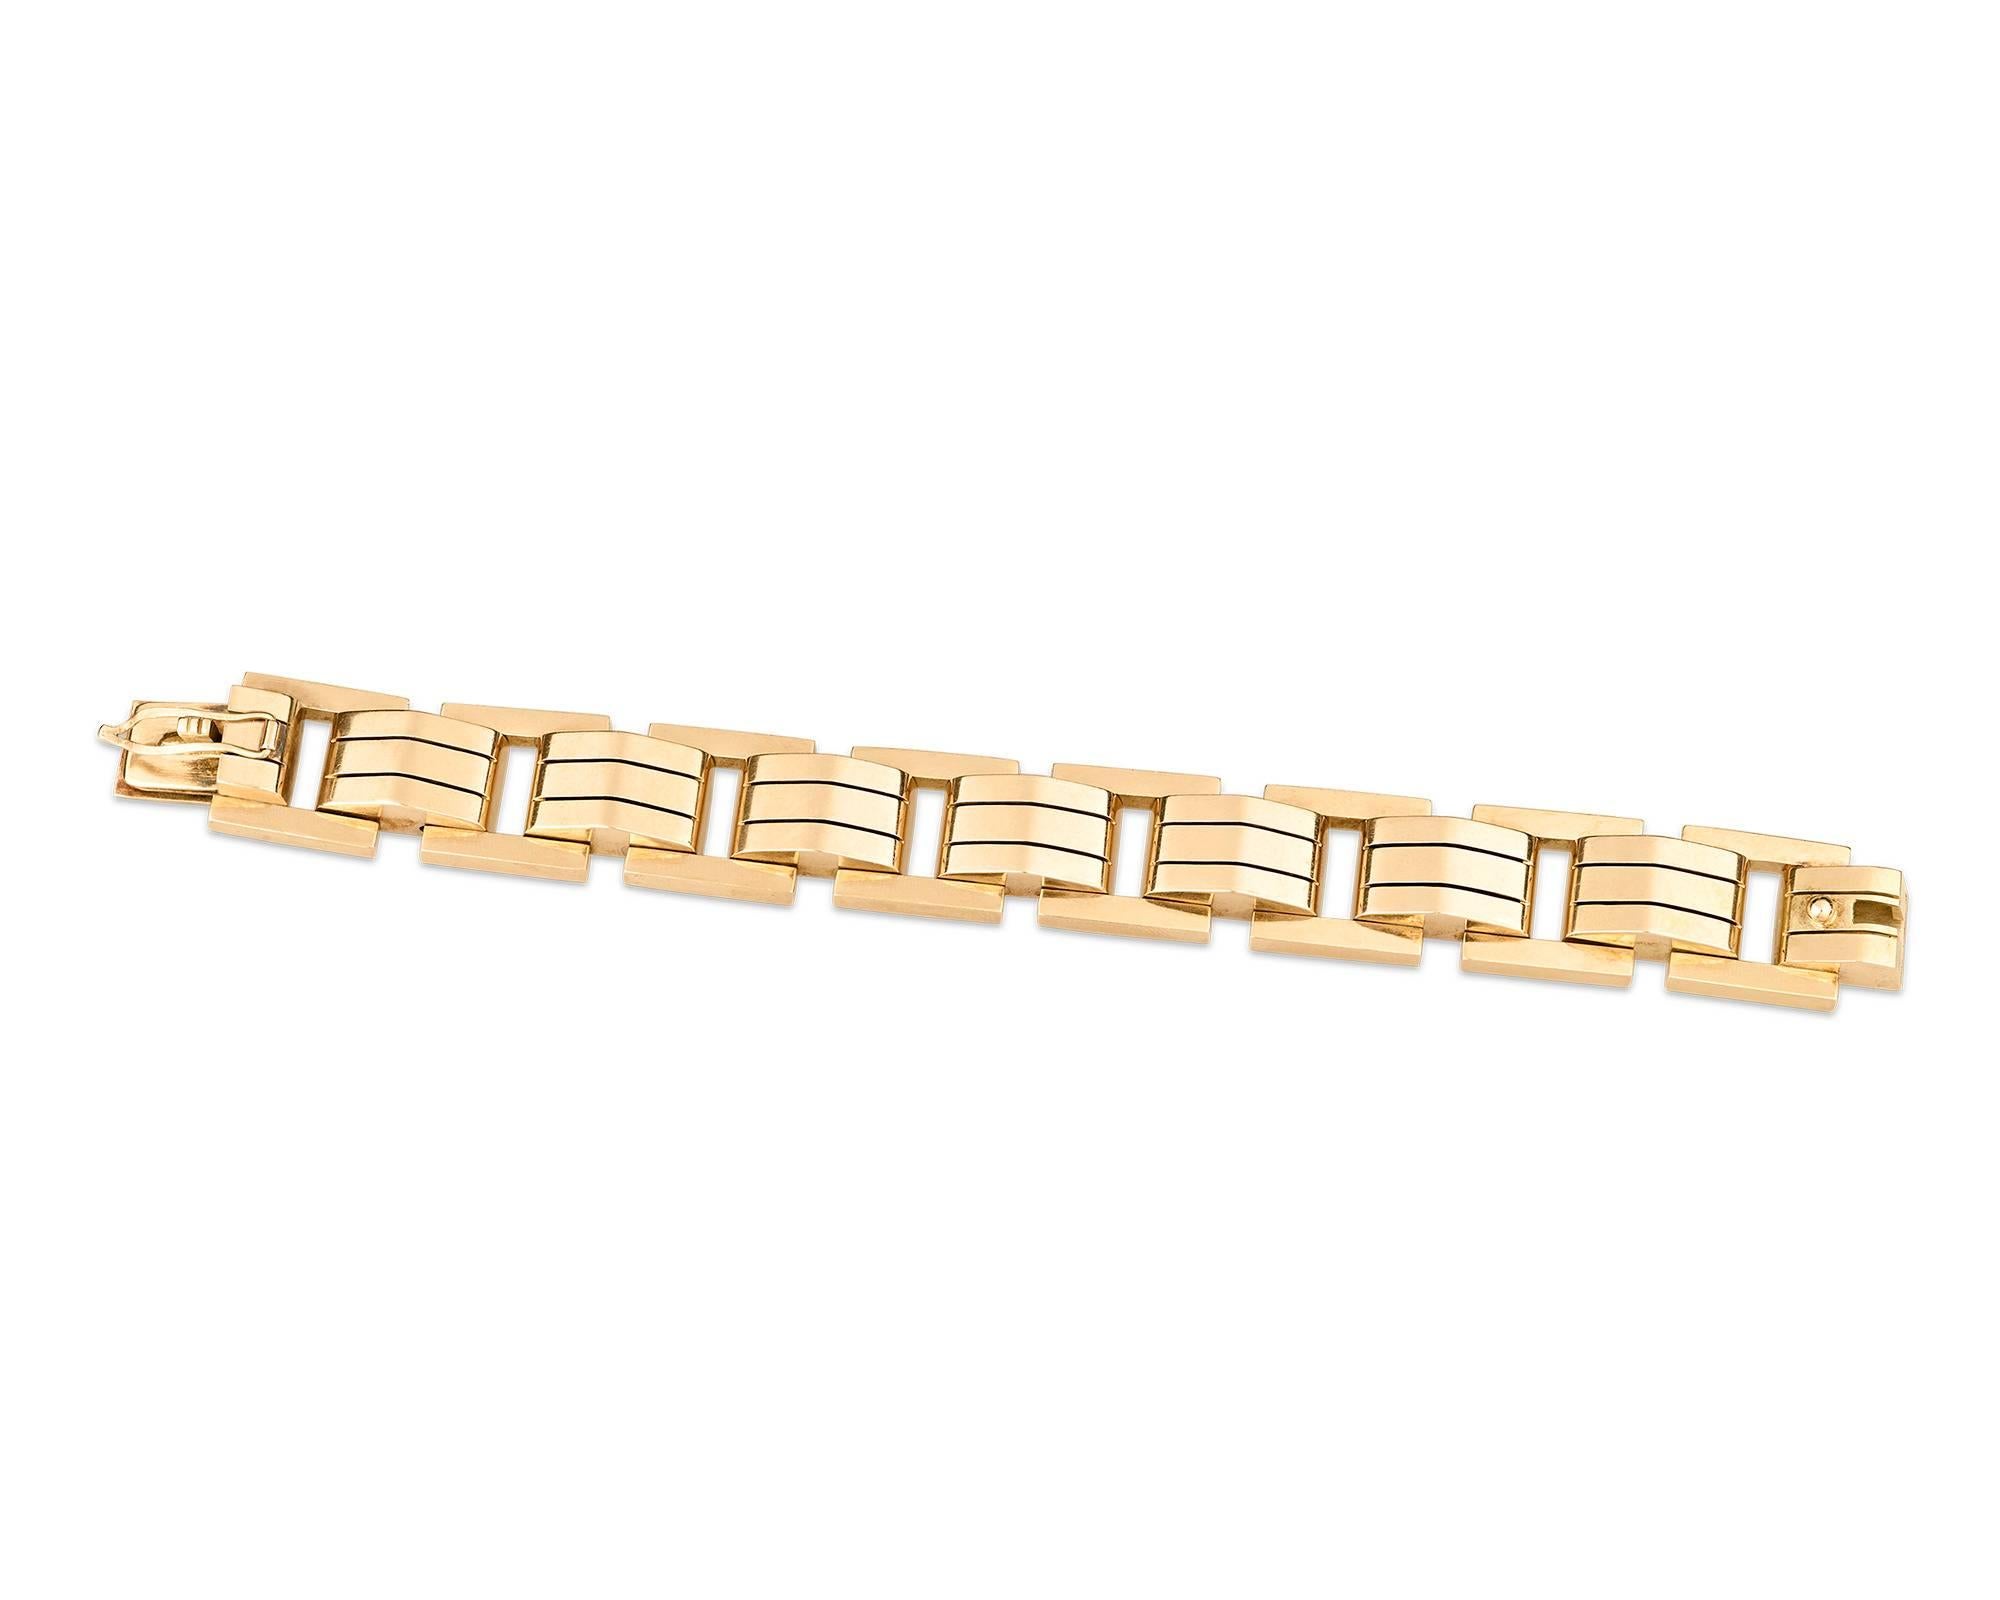 The bold styling of this 18K yellow gold bracelet is a chic example of mid-20th-century retro jewelry. Characterized by eye-catching design and grand proportions, retro jewelry reflected the desire for fantasy and glamor during the difficult years